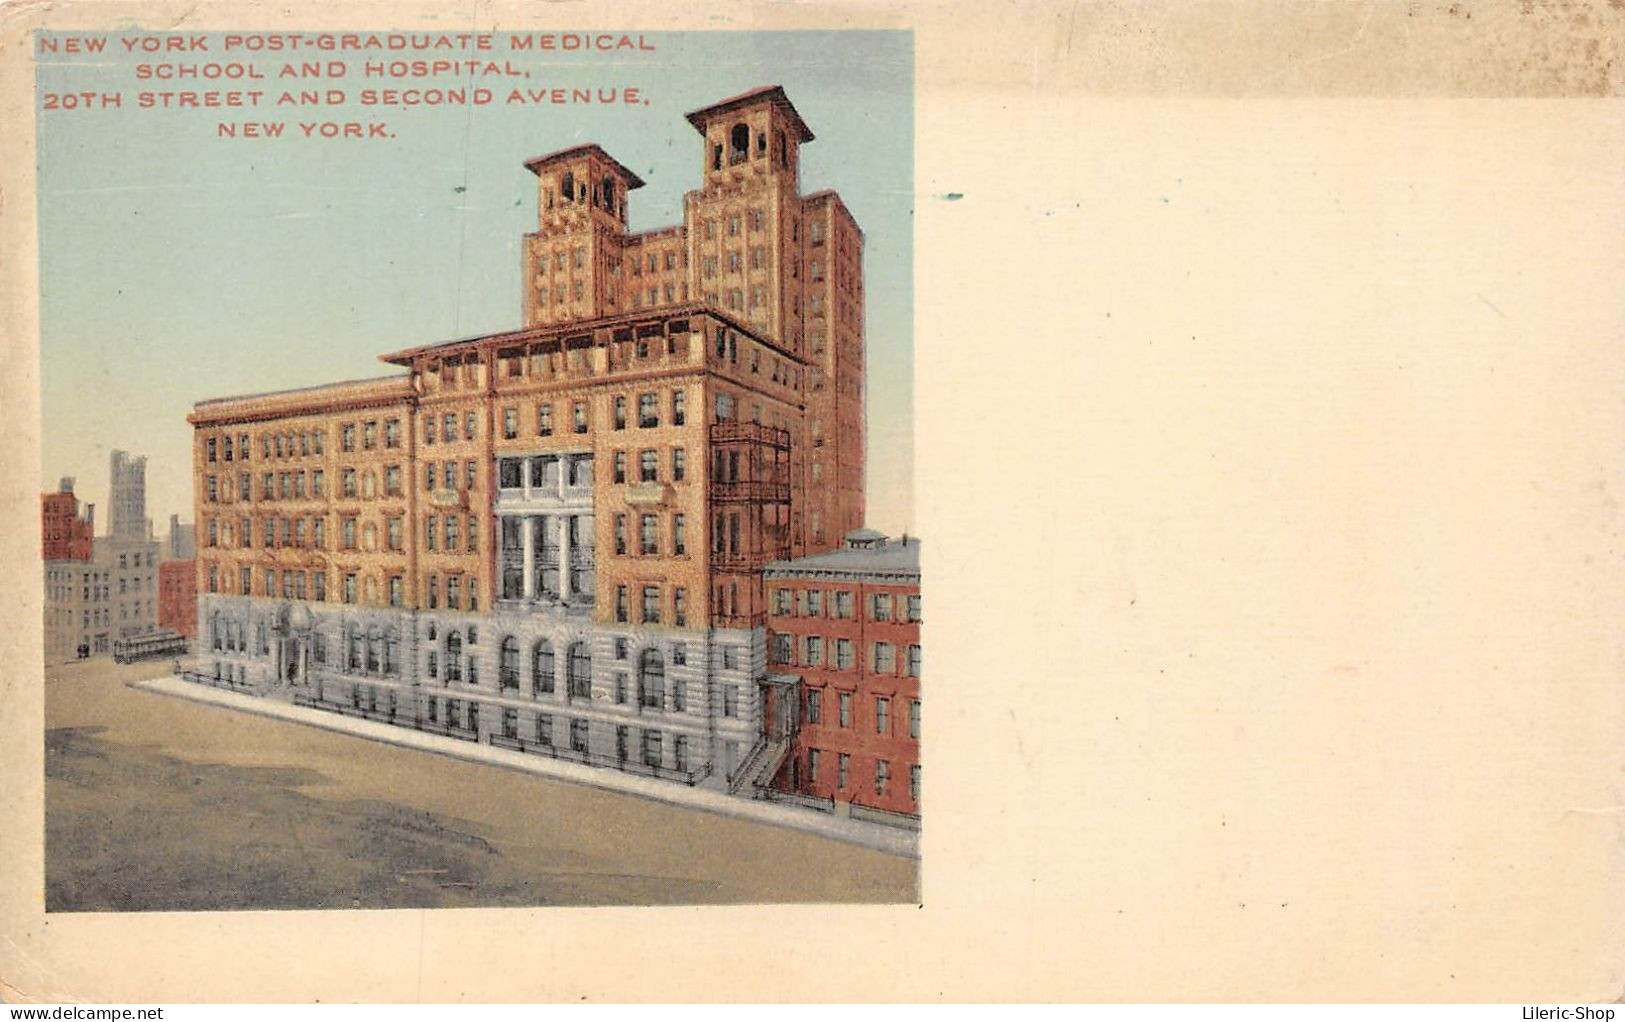 NEW YORK POST-GRADUATE MEDICAL SCHOOL AND HOSPITAL, 20TH STREET AND SECOND AVENUE, NEW YORK. - Health & Hospitals